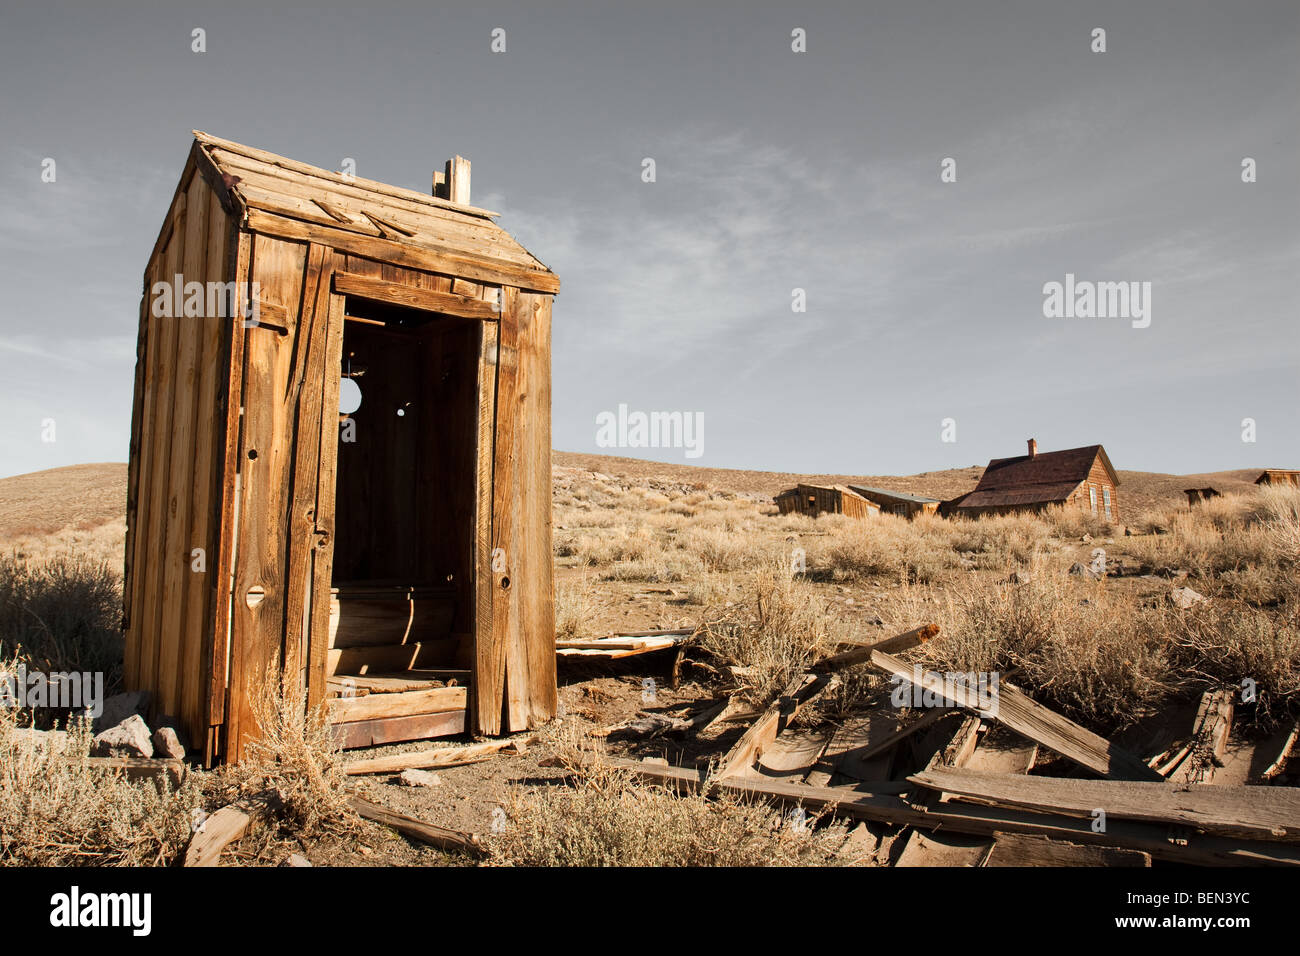 Abandoned outhouse in the ghost town of Bodie, CA Stock Photo